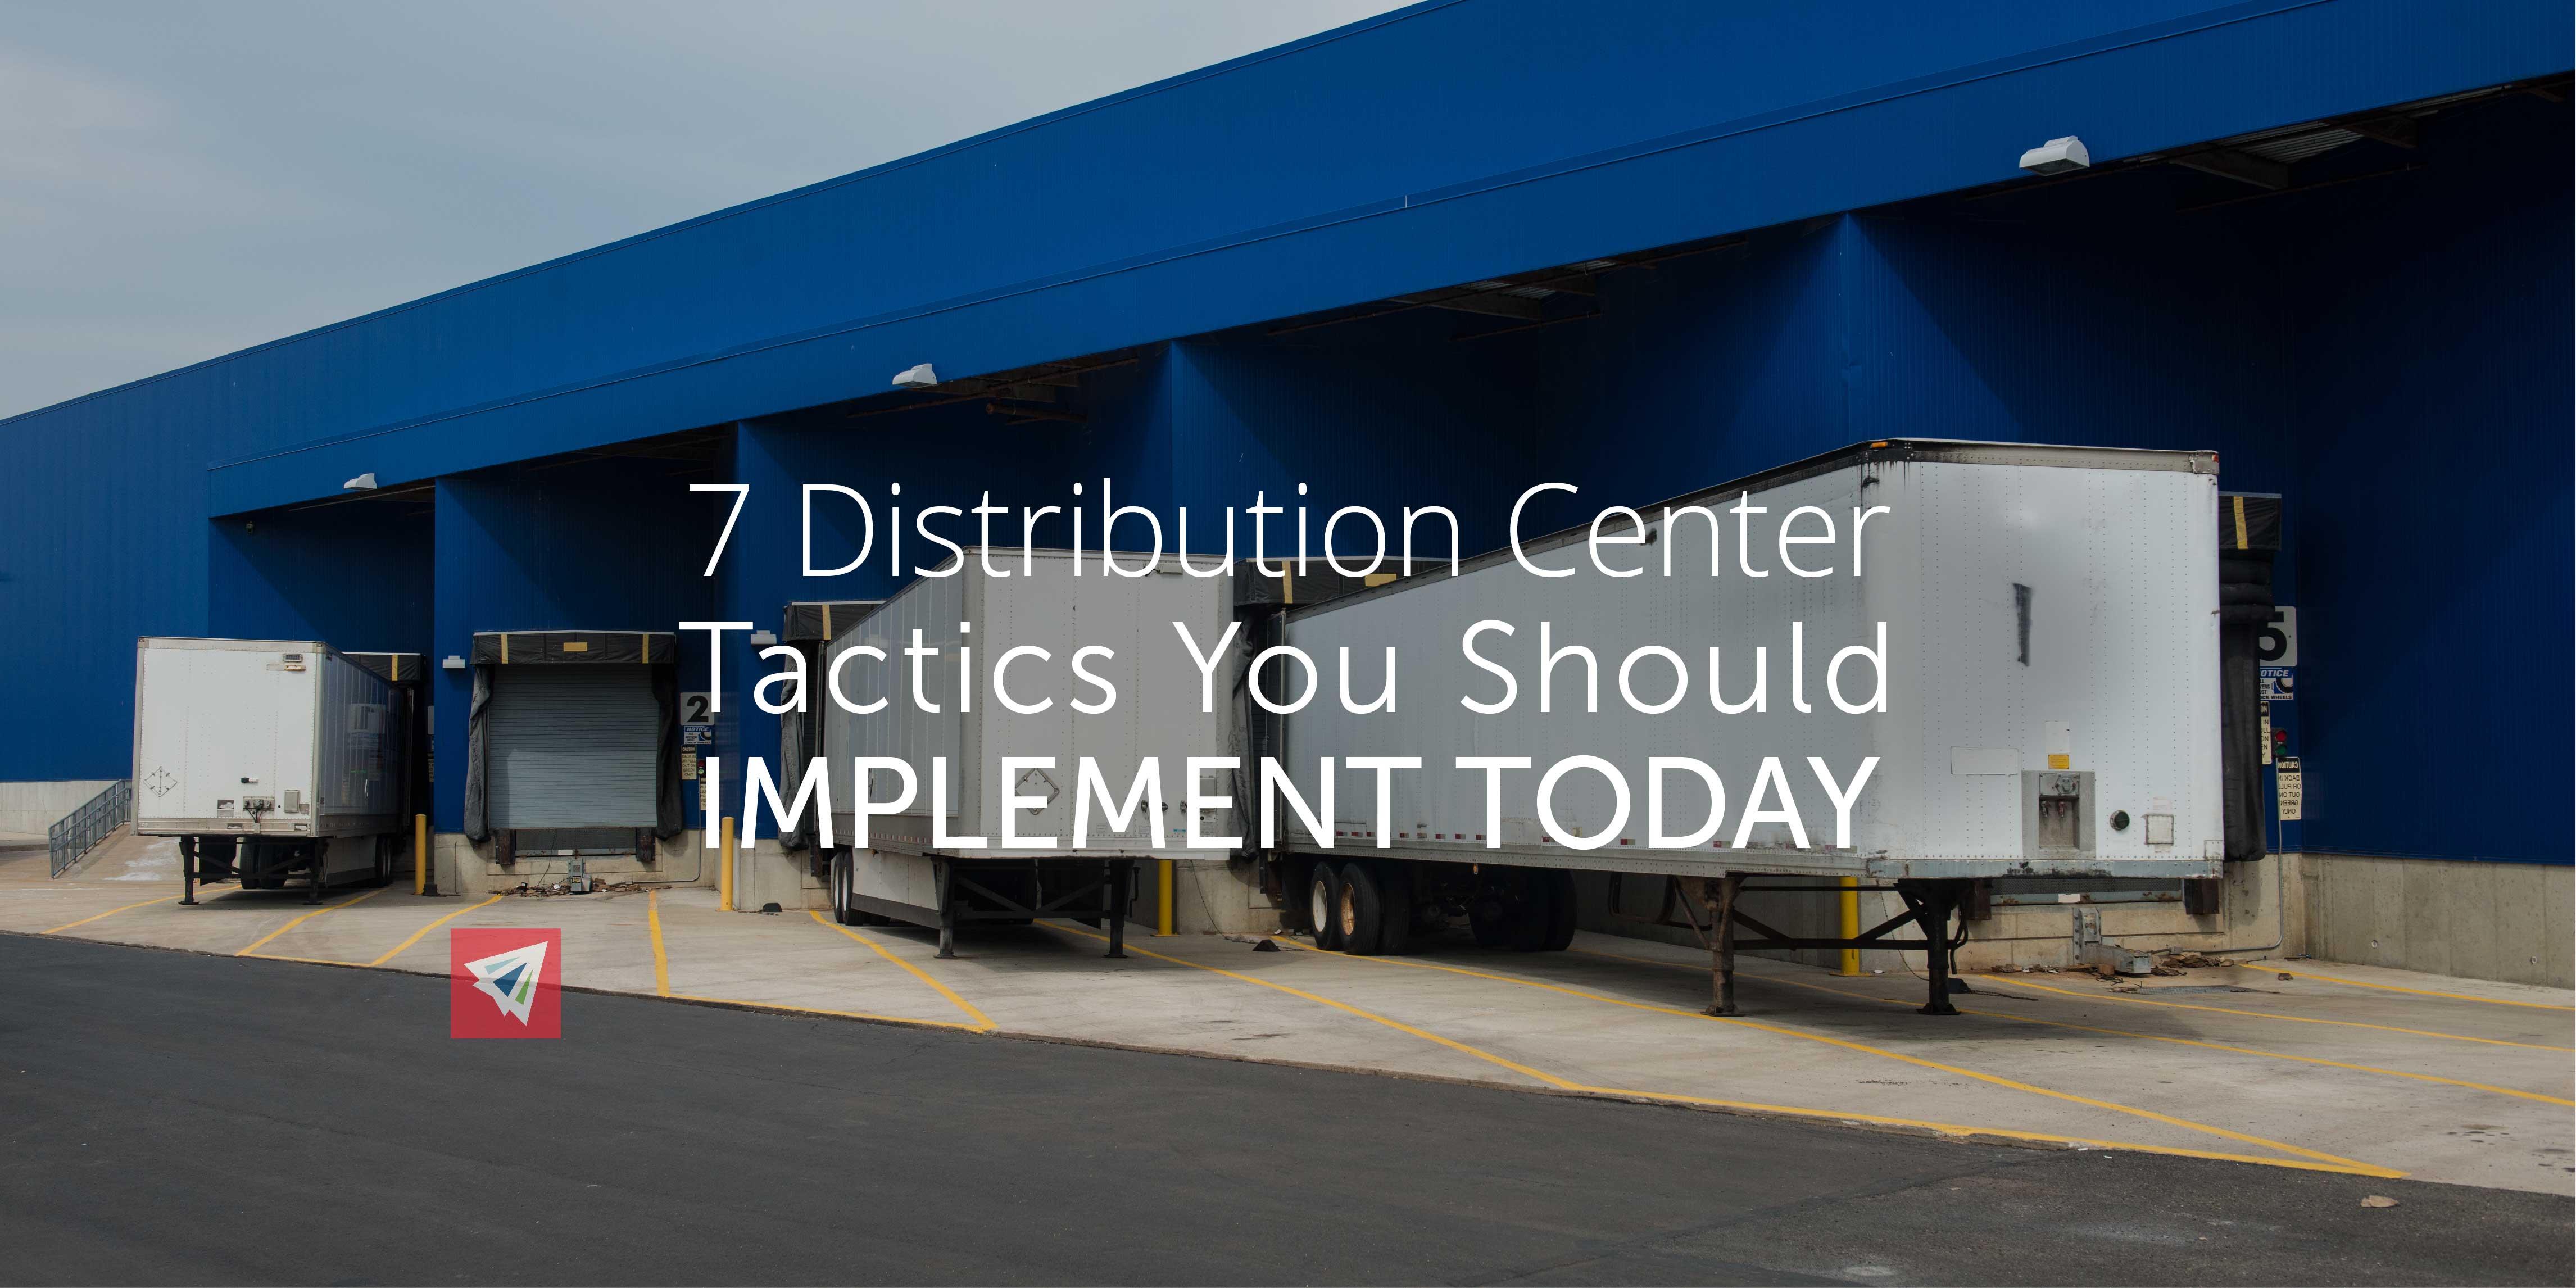 7 Distribution Center Tactics You Should Implement into Your Business